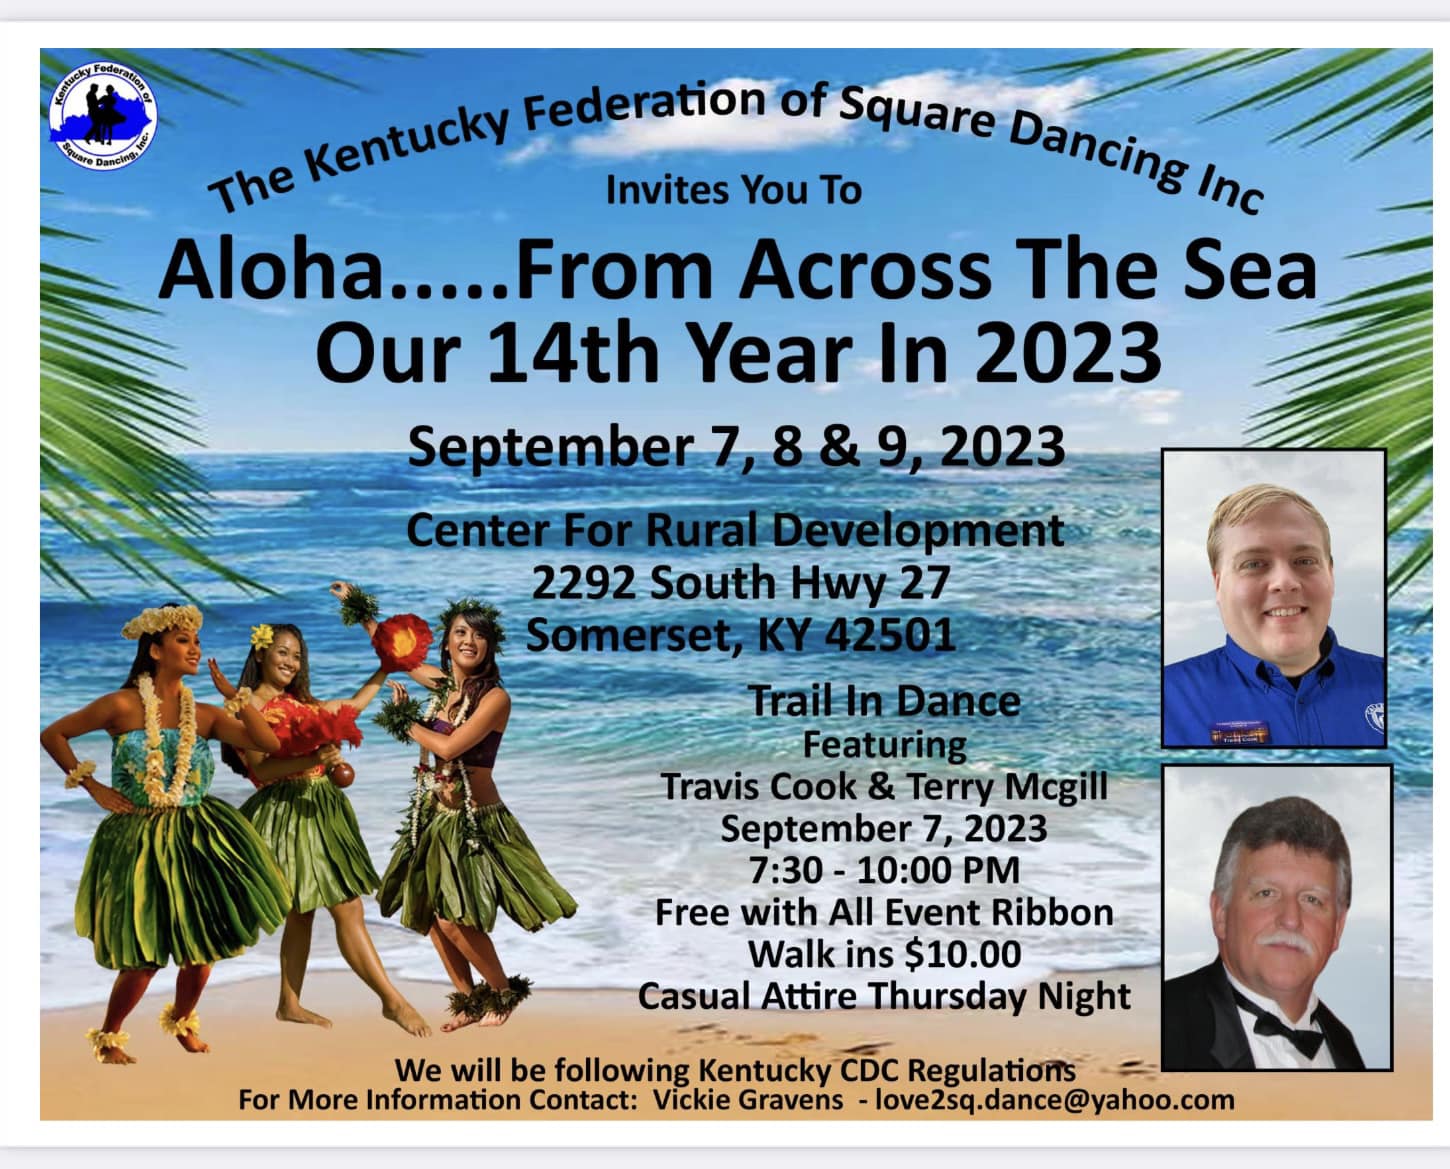 Flyer for Aloha From Across The Sea, Kentucky Federation of Square Dancing